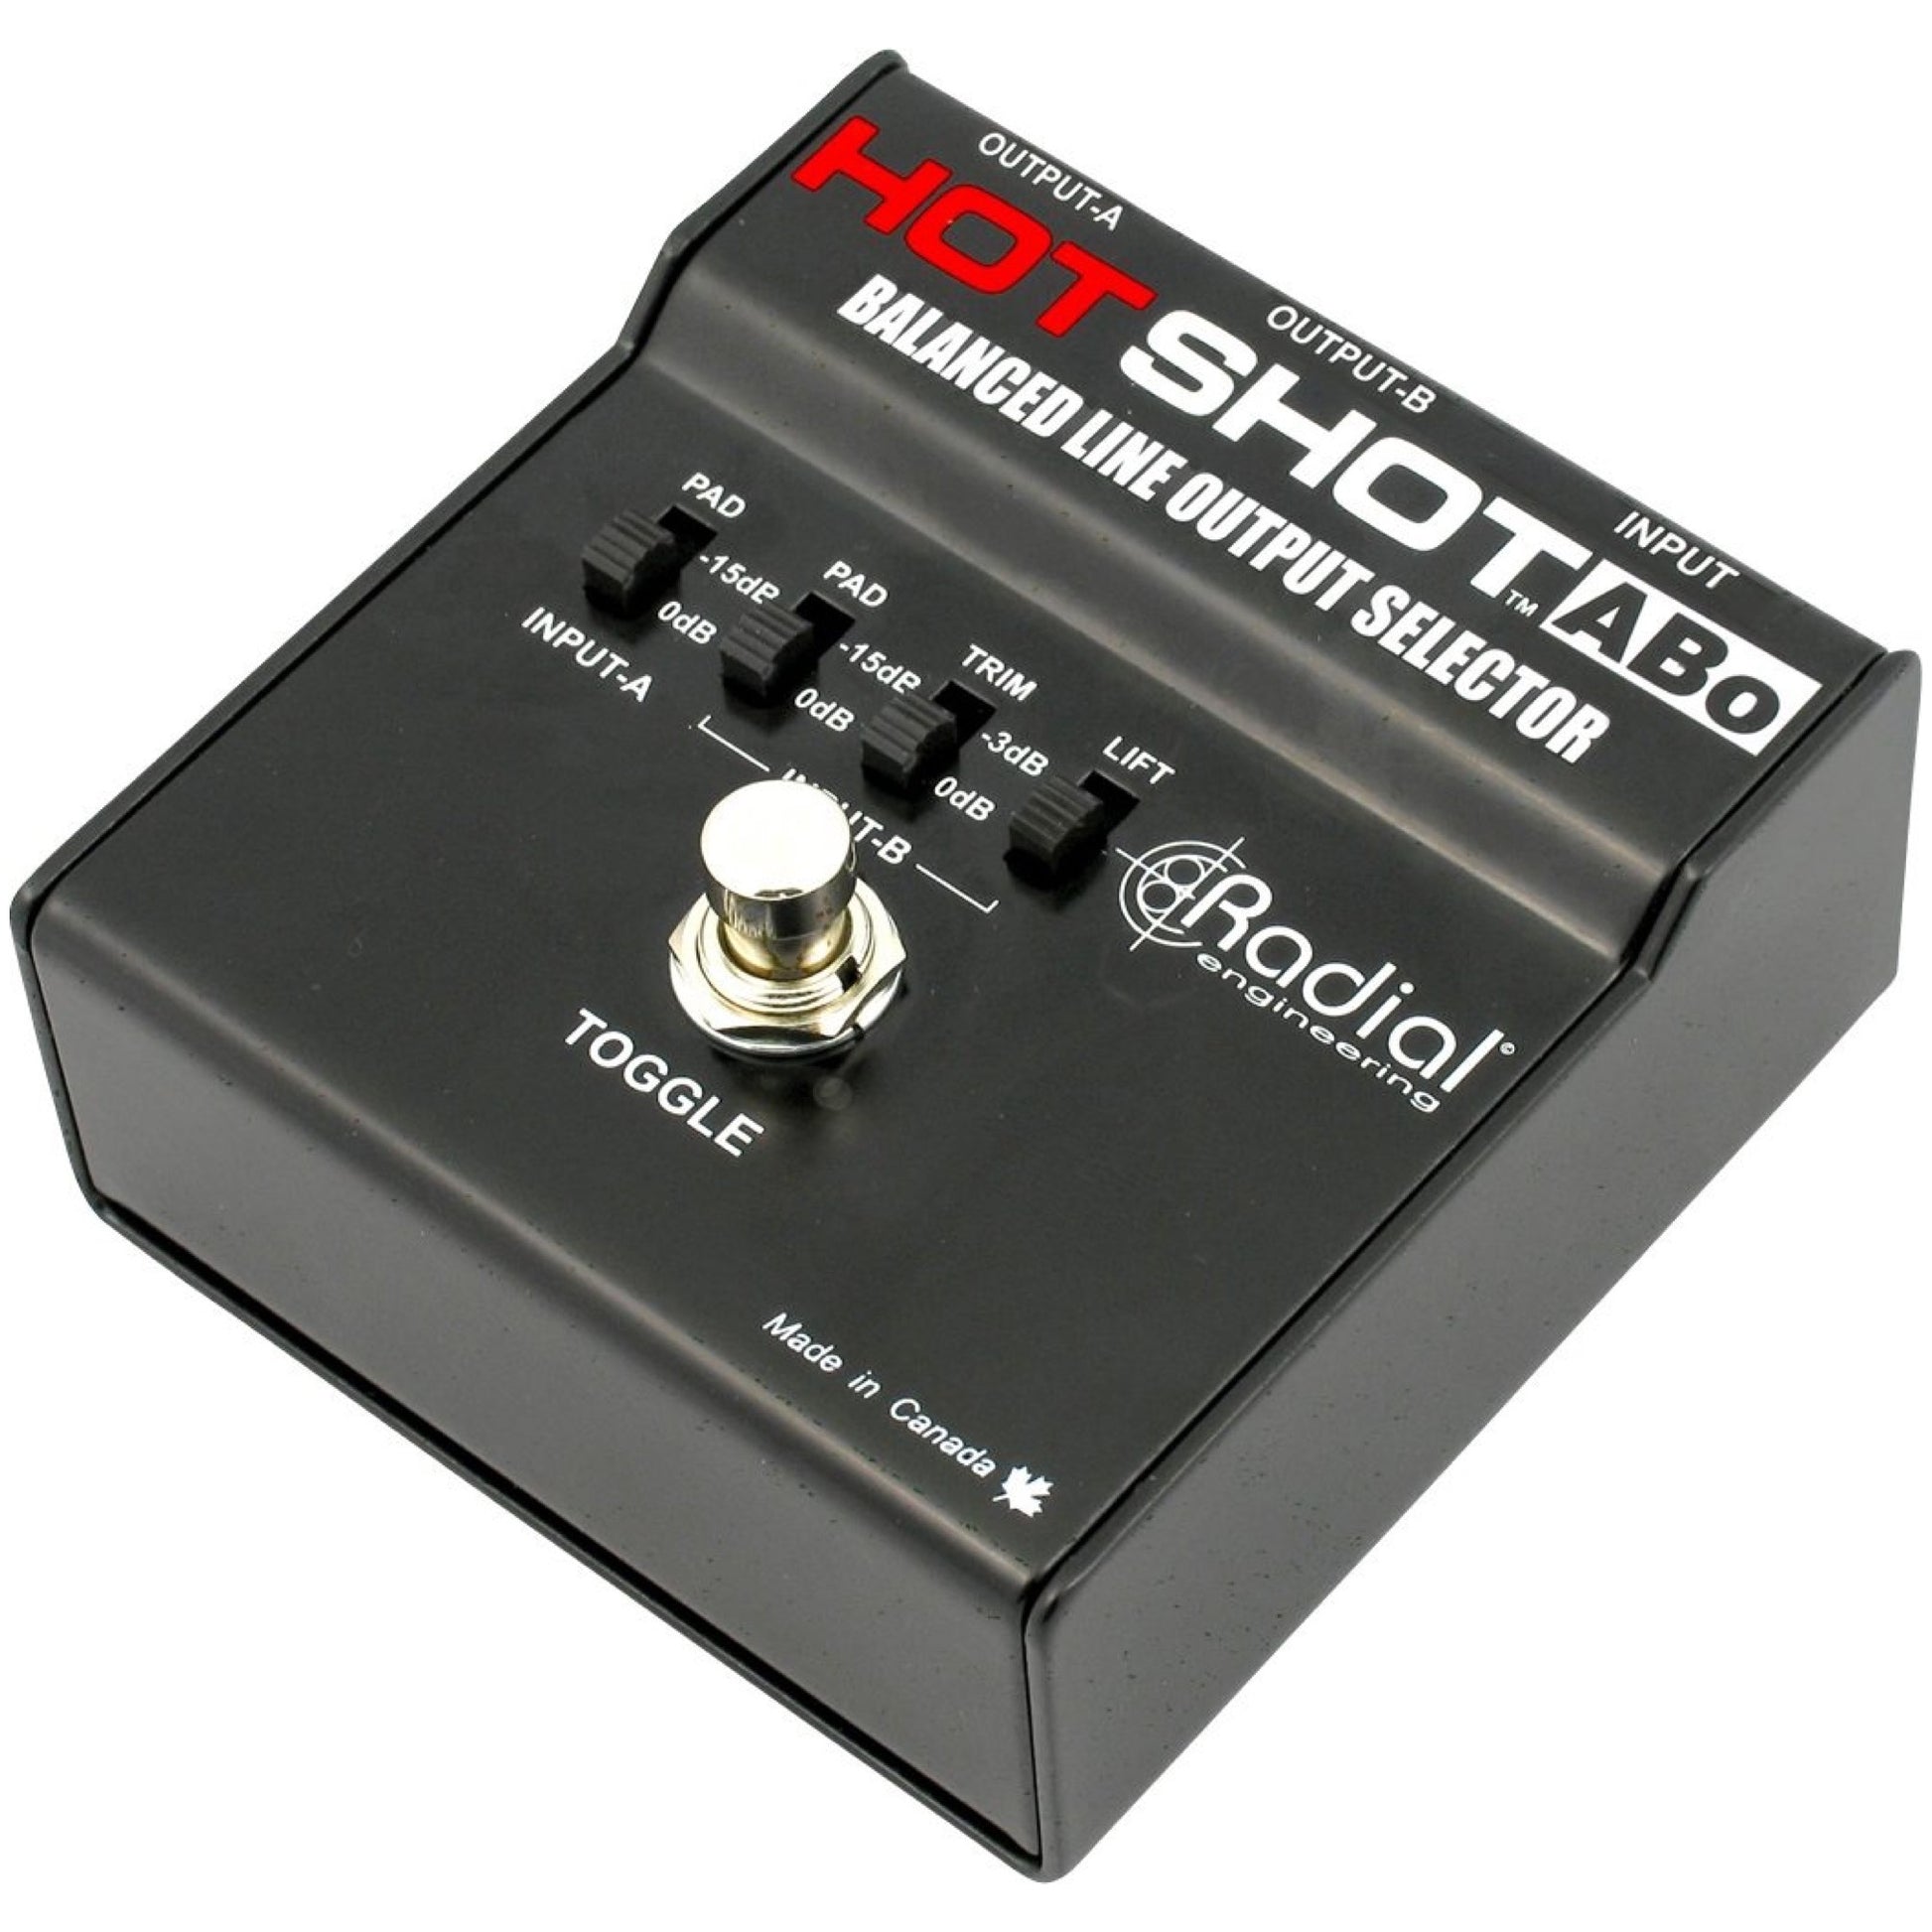 Radial Hot Shot ABo Microphone and Line Switcher Pedal